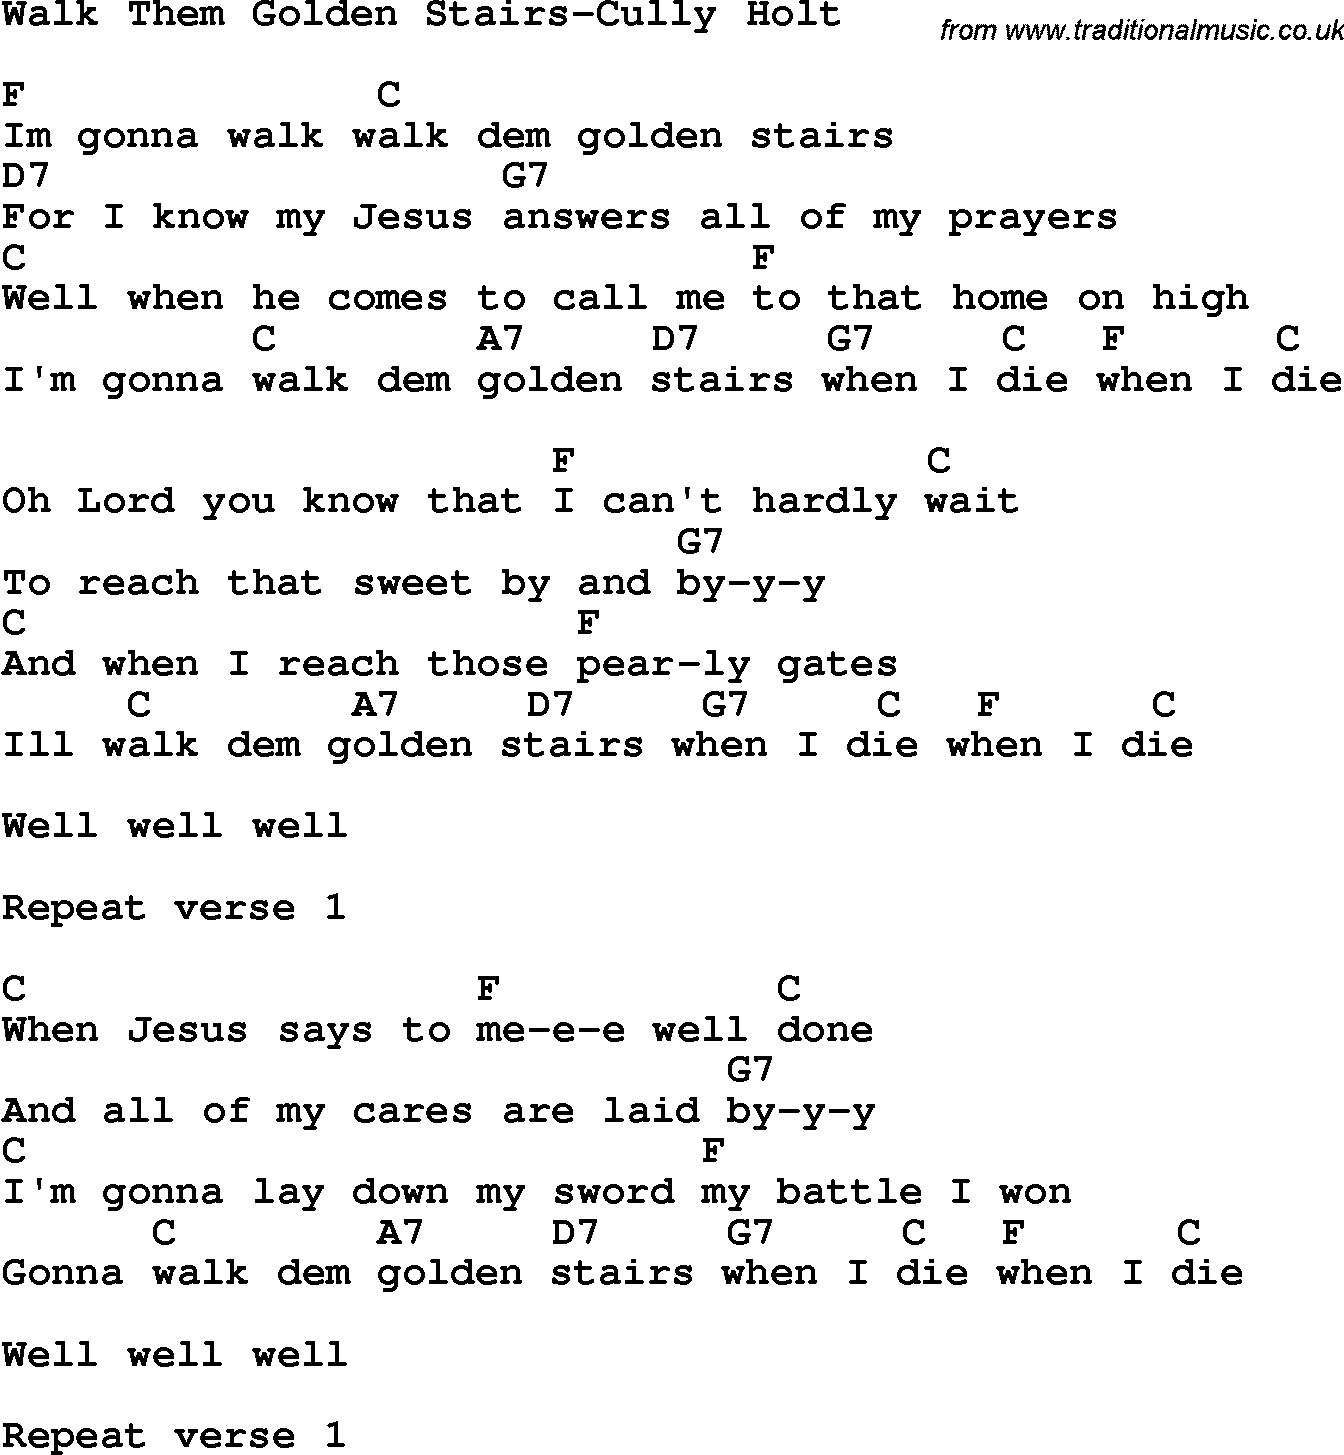 Country, Southern and Bluegrass Gospel Song Walk Them Golden Stairs-Cully Holt lyrics and chords